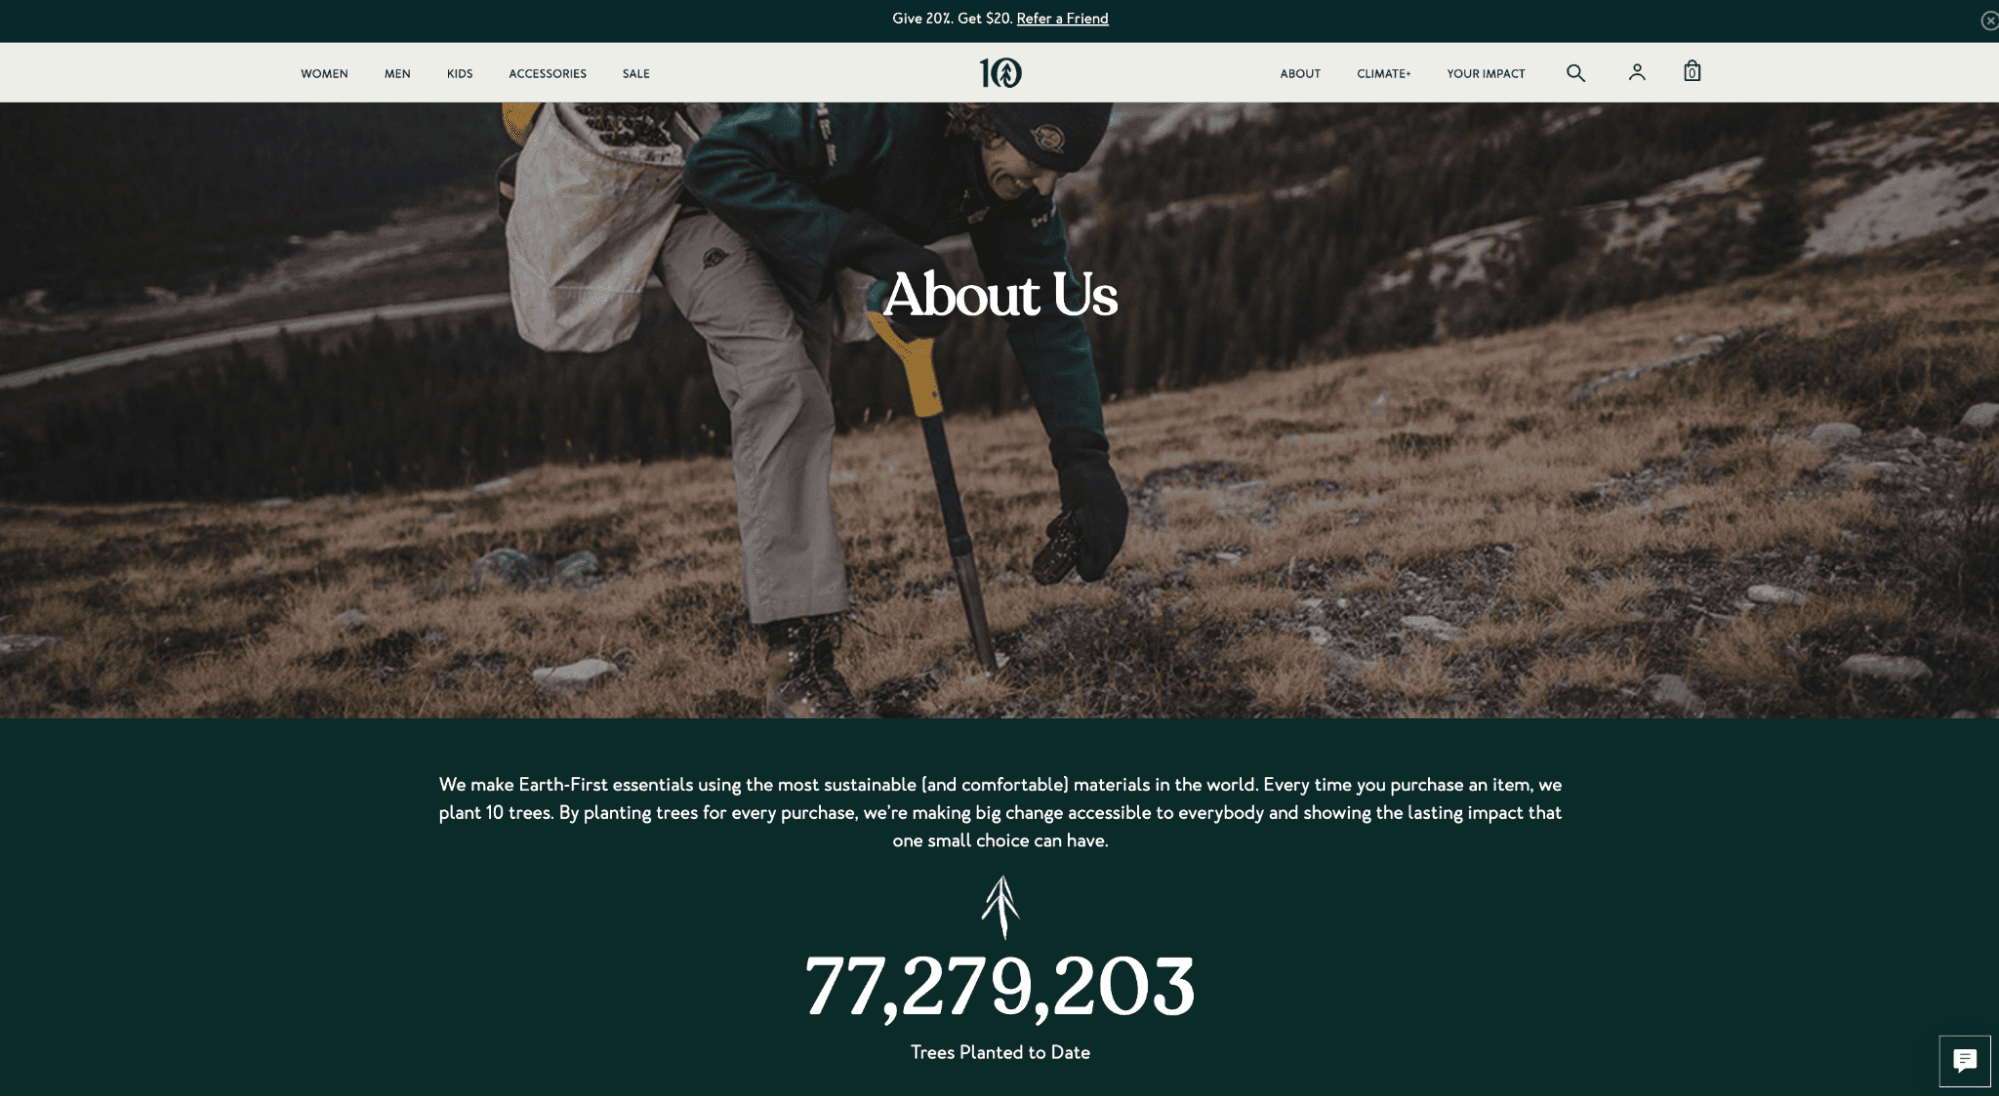 The "About Us" page of the TenTree website.